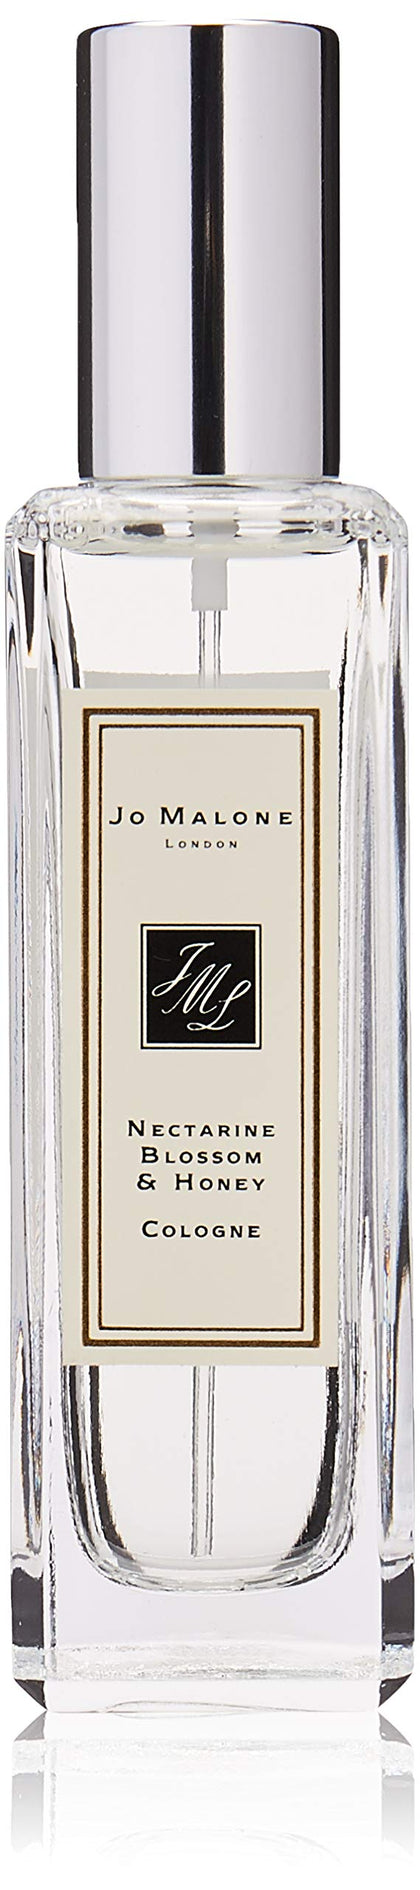 Jo Malone Nectarine Blossom and Honey-Cologne, 1 Ounce